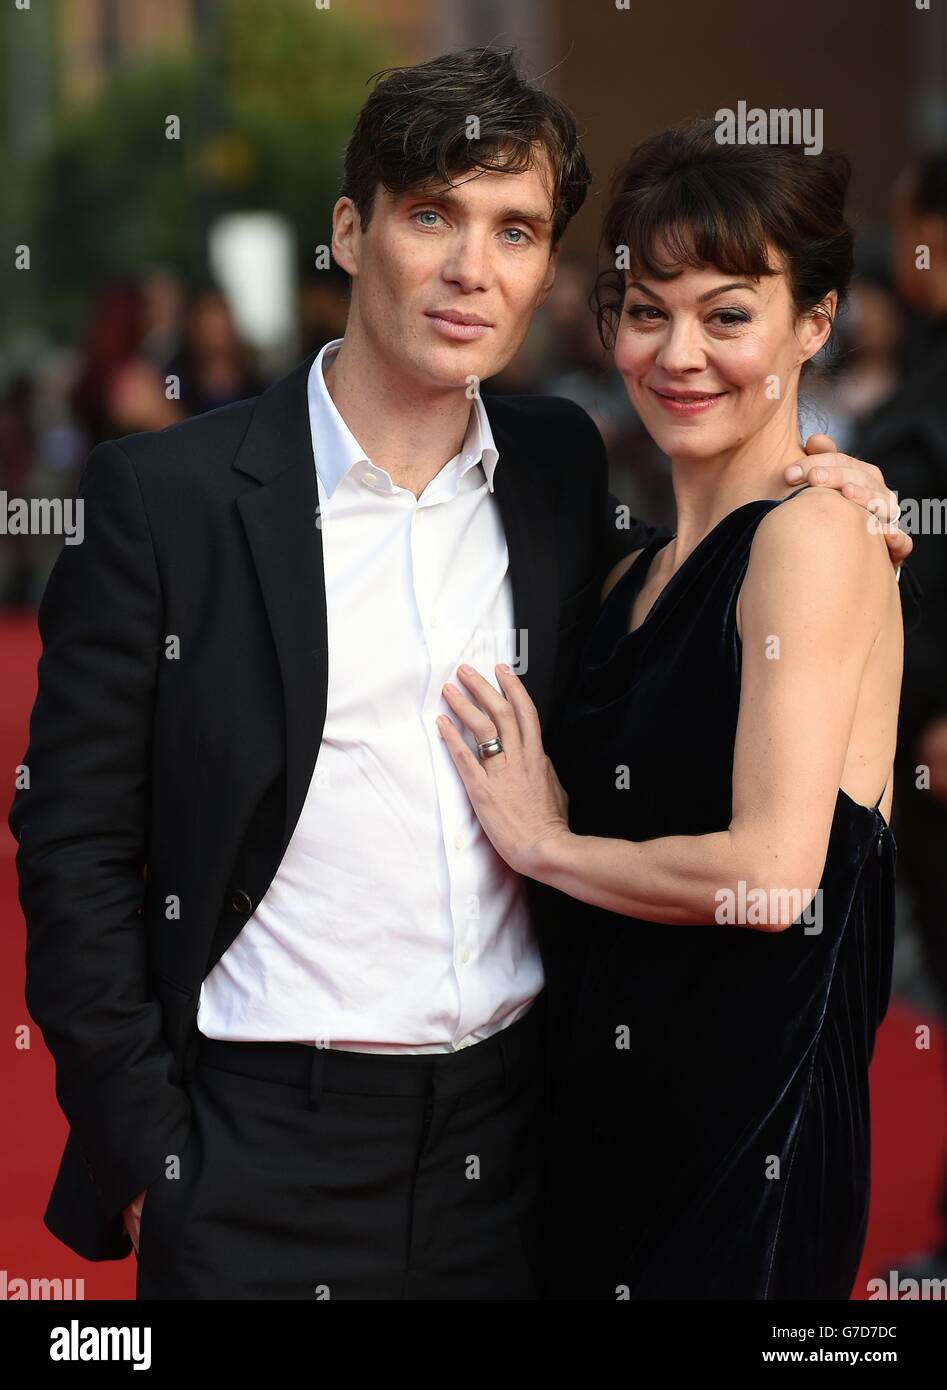 Cillian Murphy And Helen Mccrory At The Premiere Of Peaky Blinders Series 2 At Broad Street 